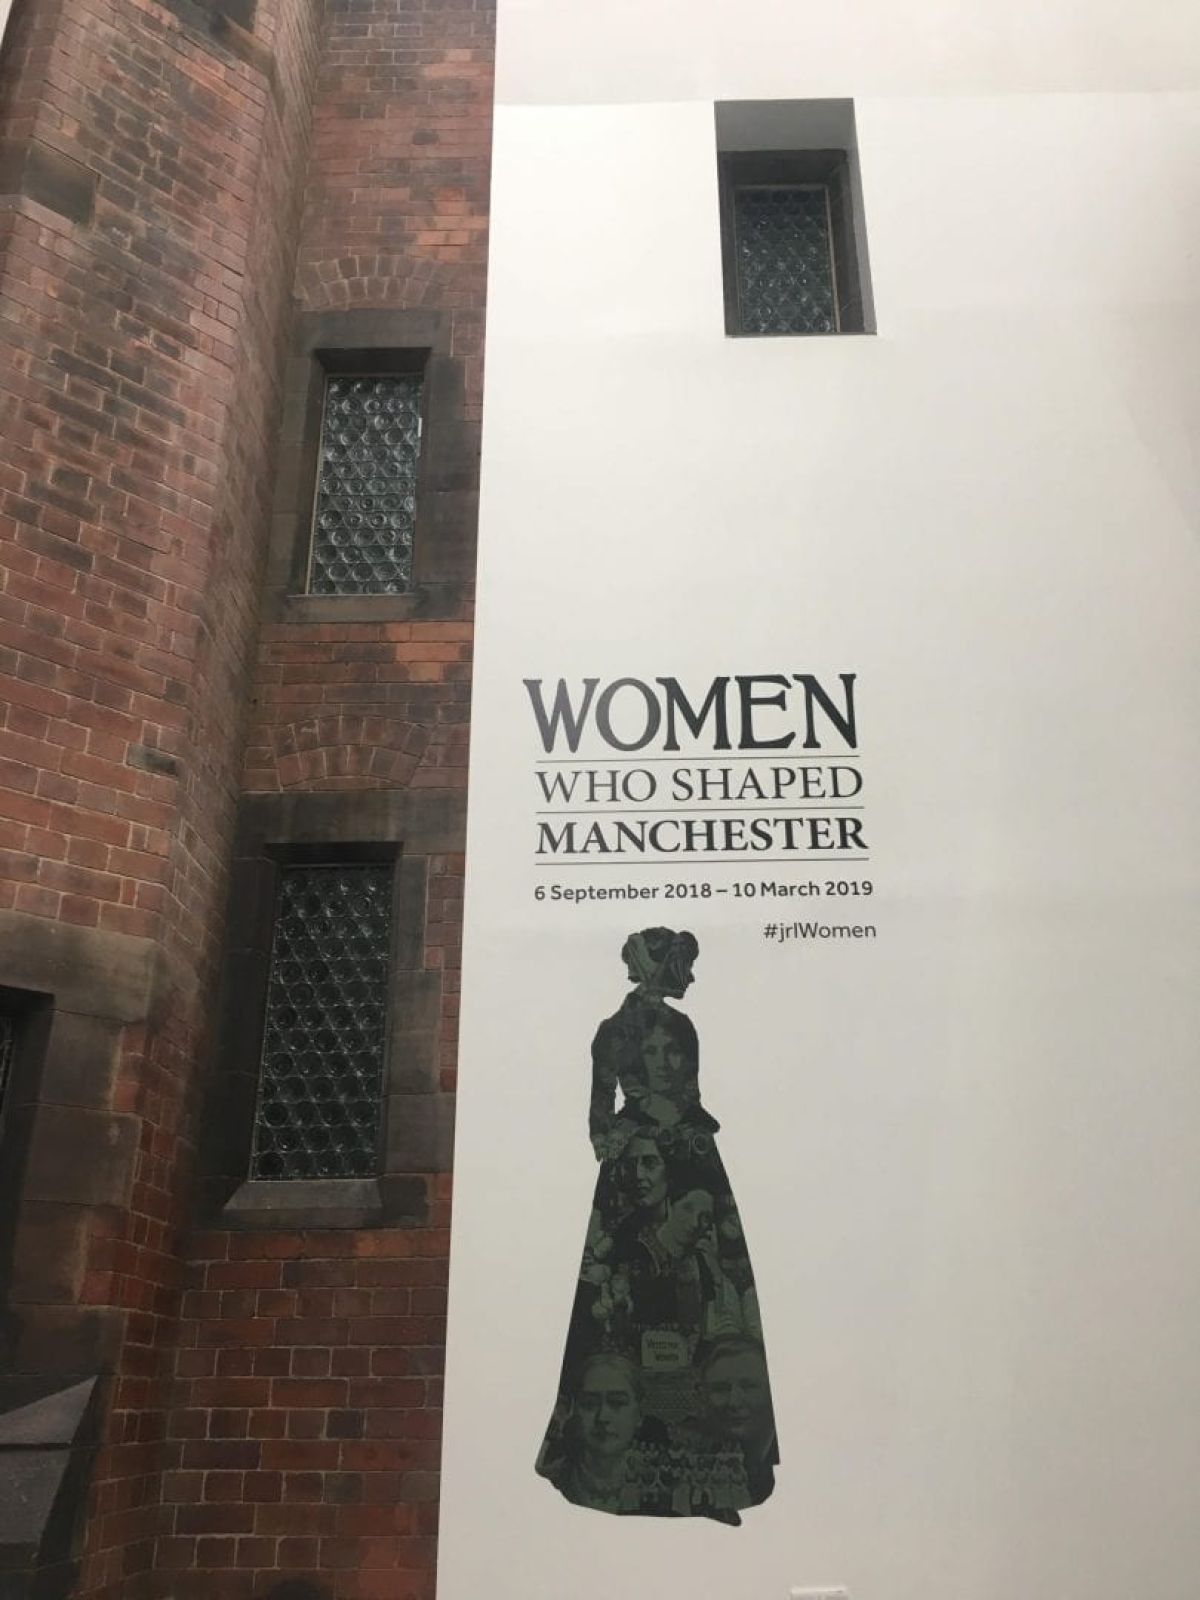 The women who shaped our city